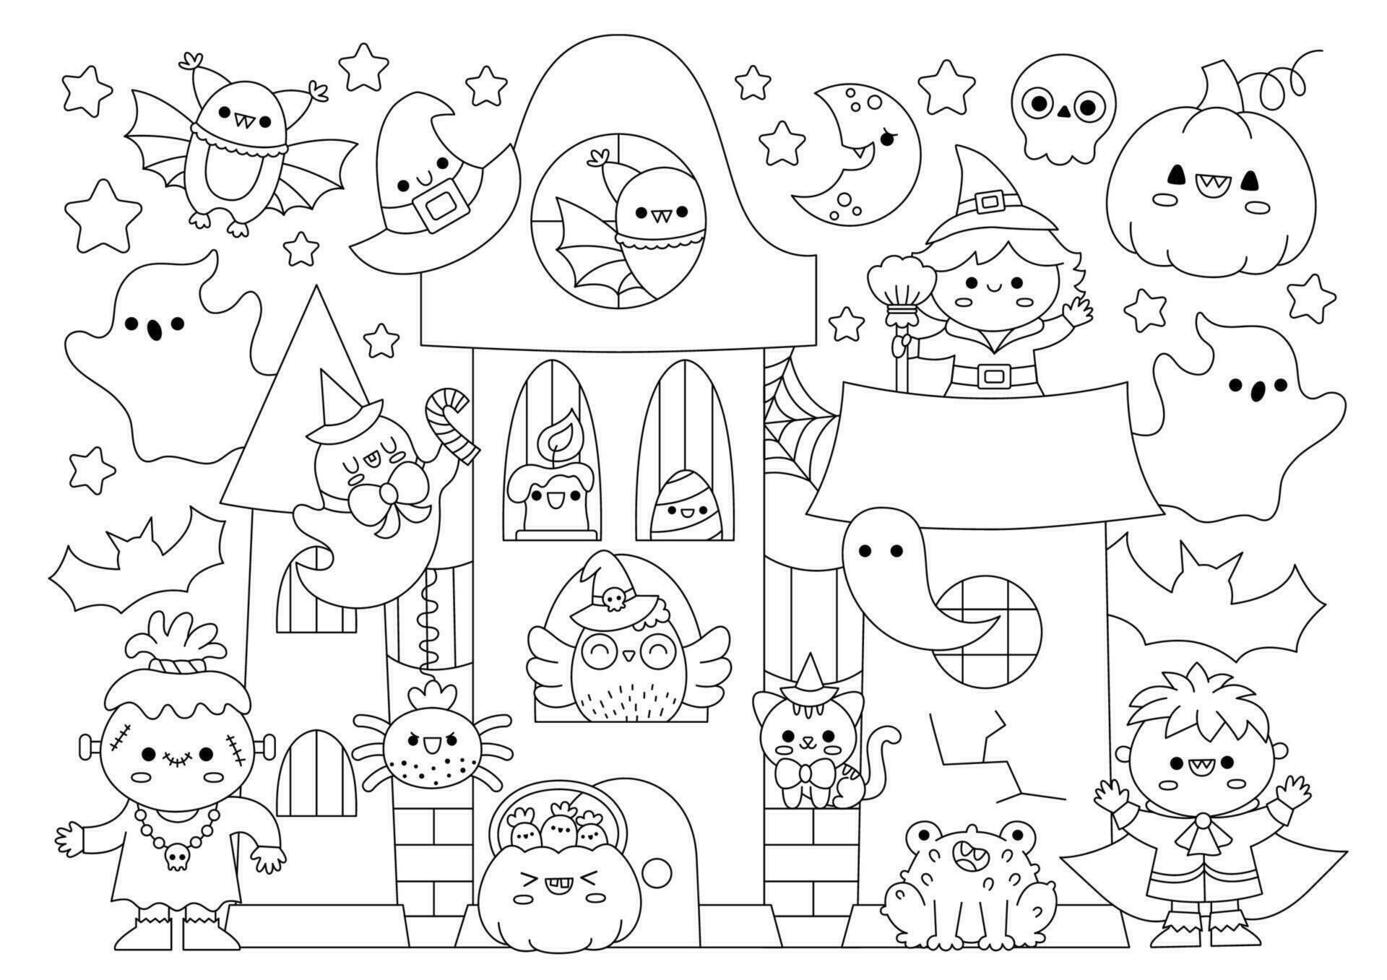 Vector Halloween horizontal line coloring page for kids with cute kawaii characters. Black and white autumn holiday illustration with witch, vampire, ghost, pumpkin. Funny searching poster